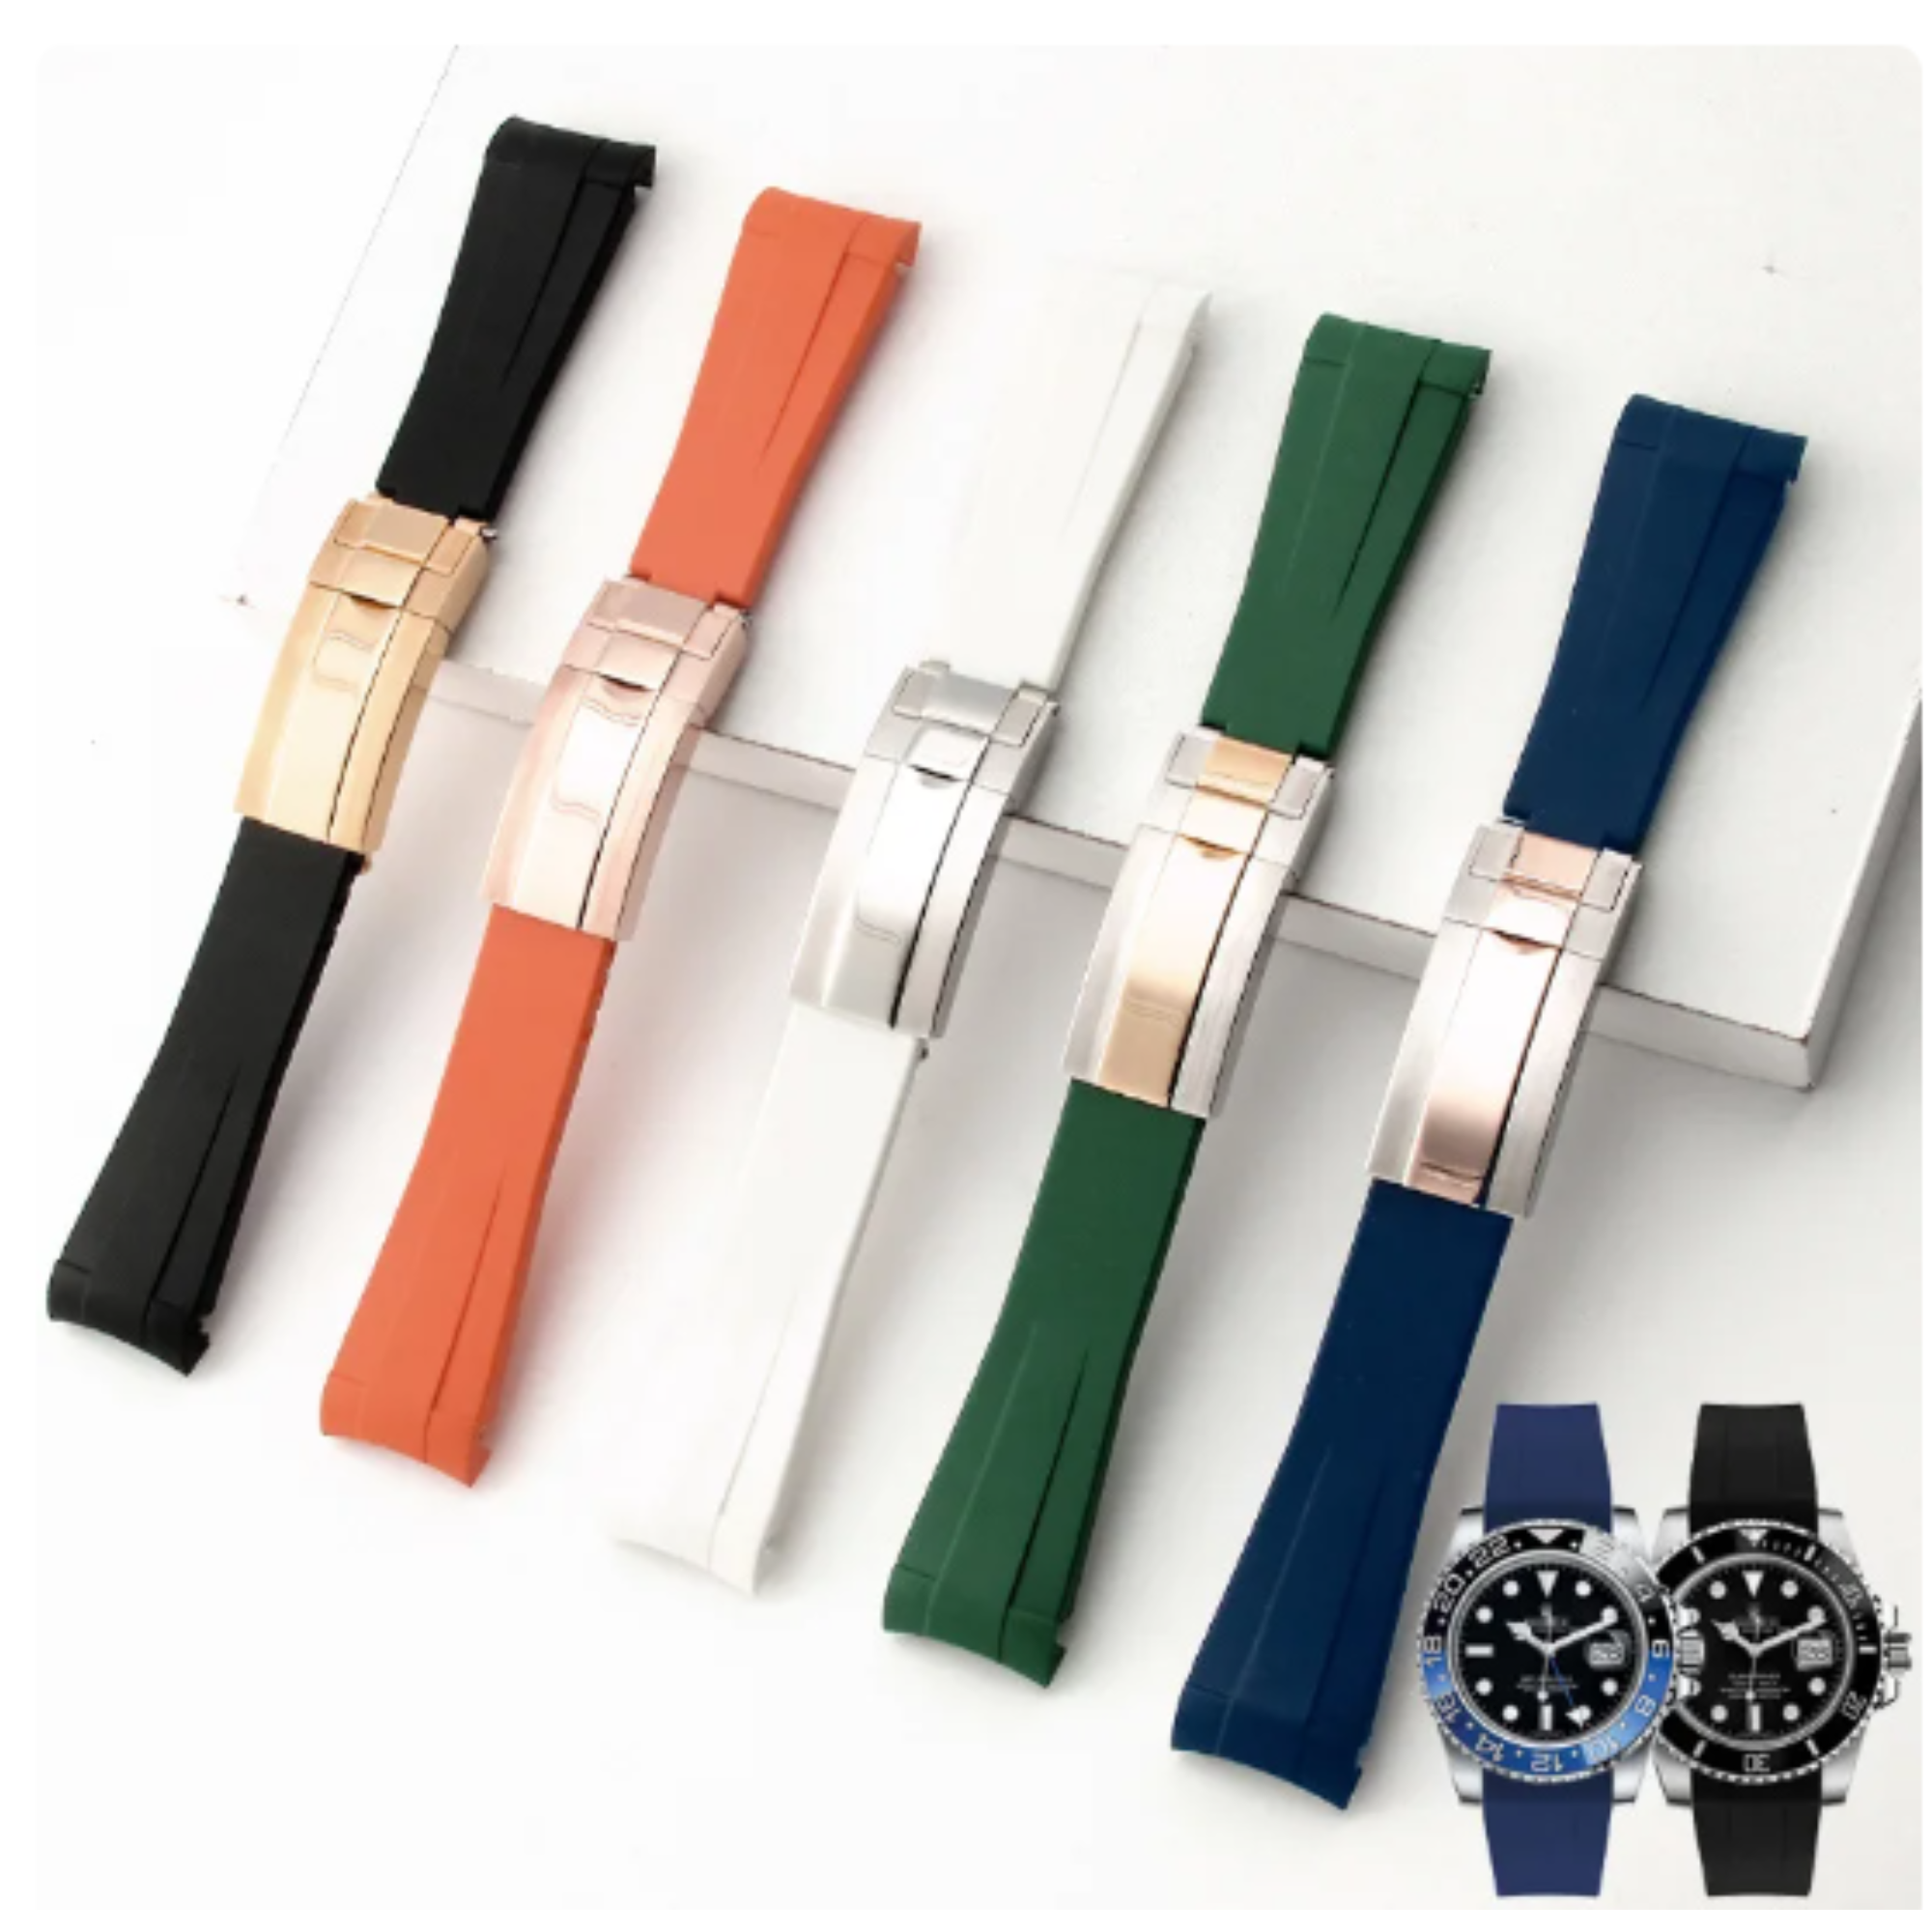 High End Curved FKM Rubber Watch Band with Oyster Style Deployment Clasp: 20 mm - Orange with Gold Dual tone